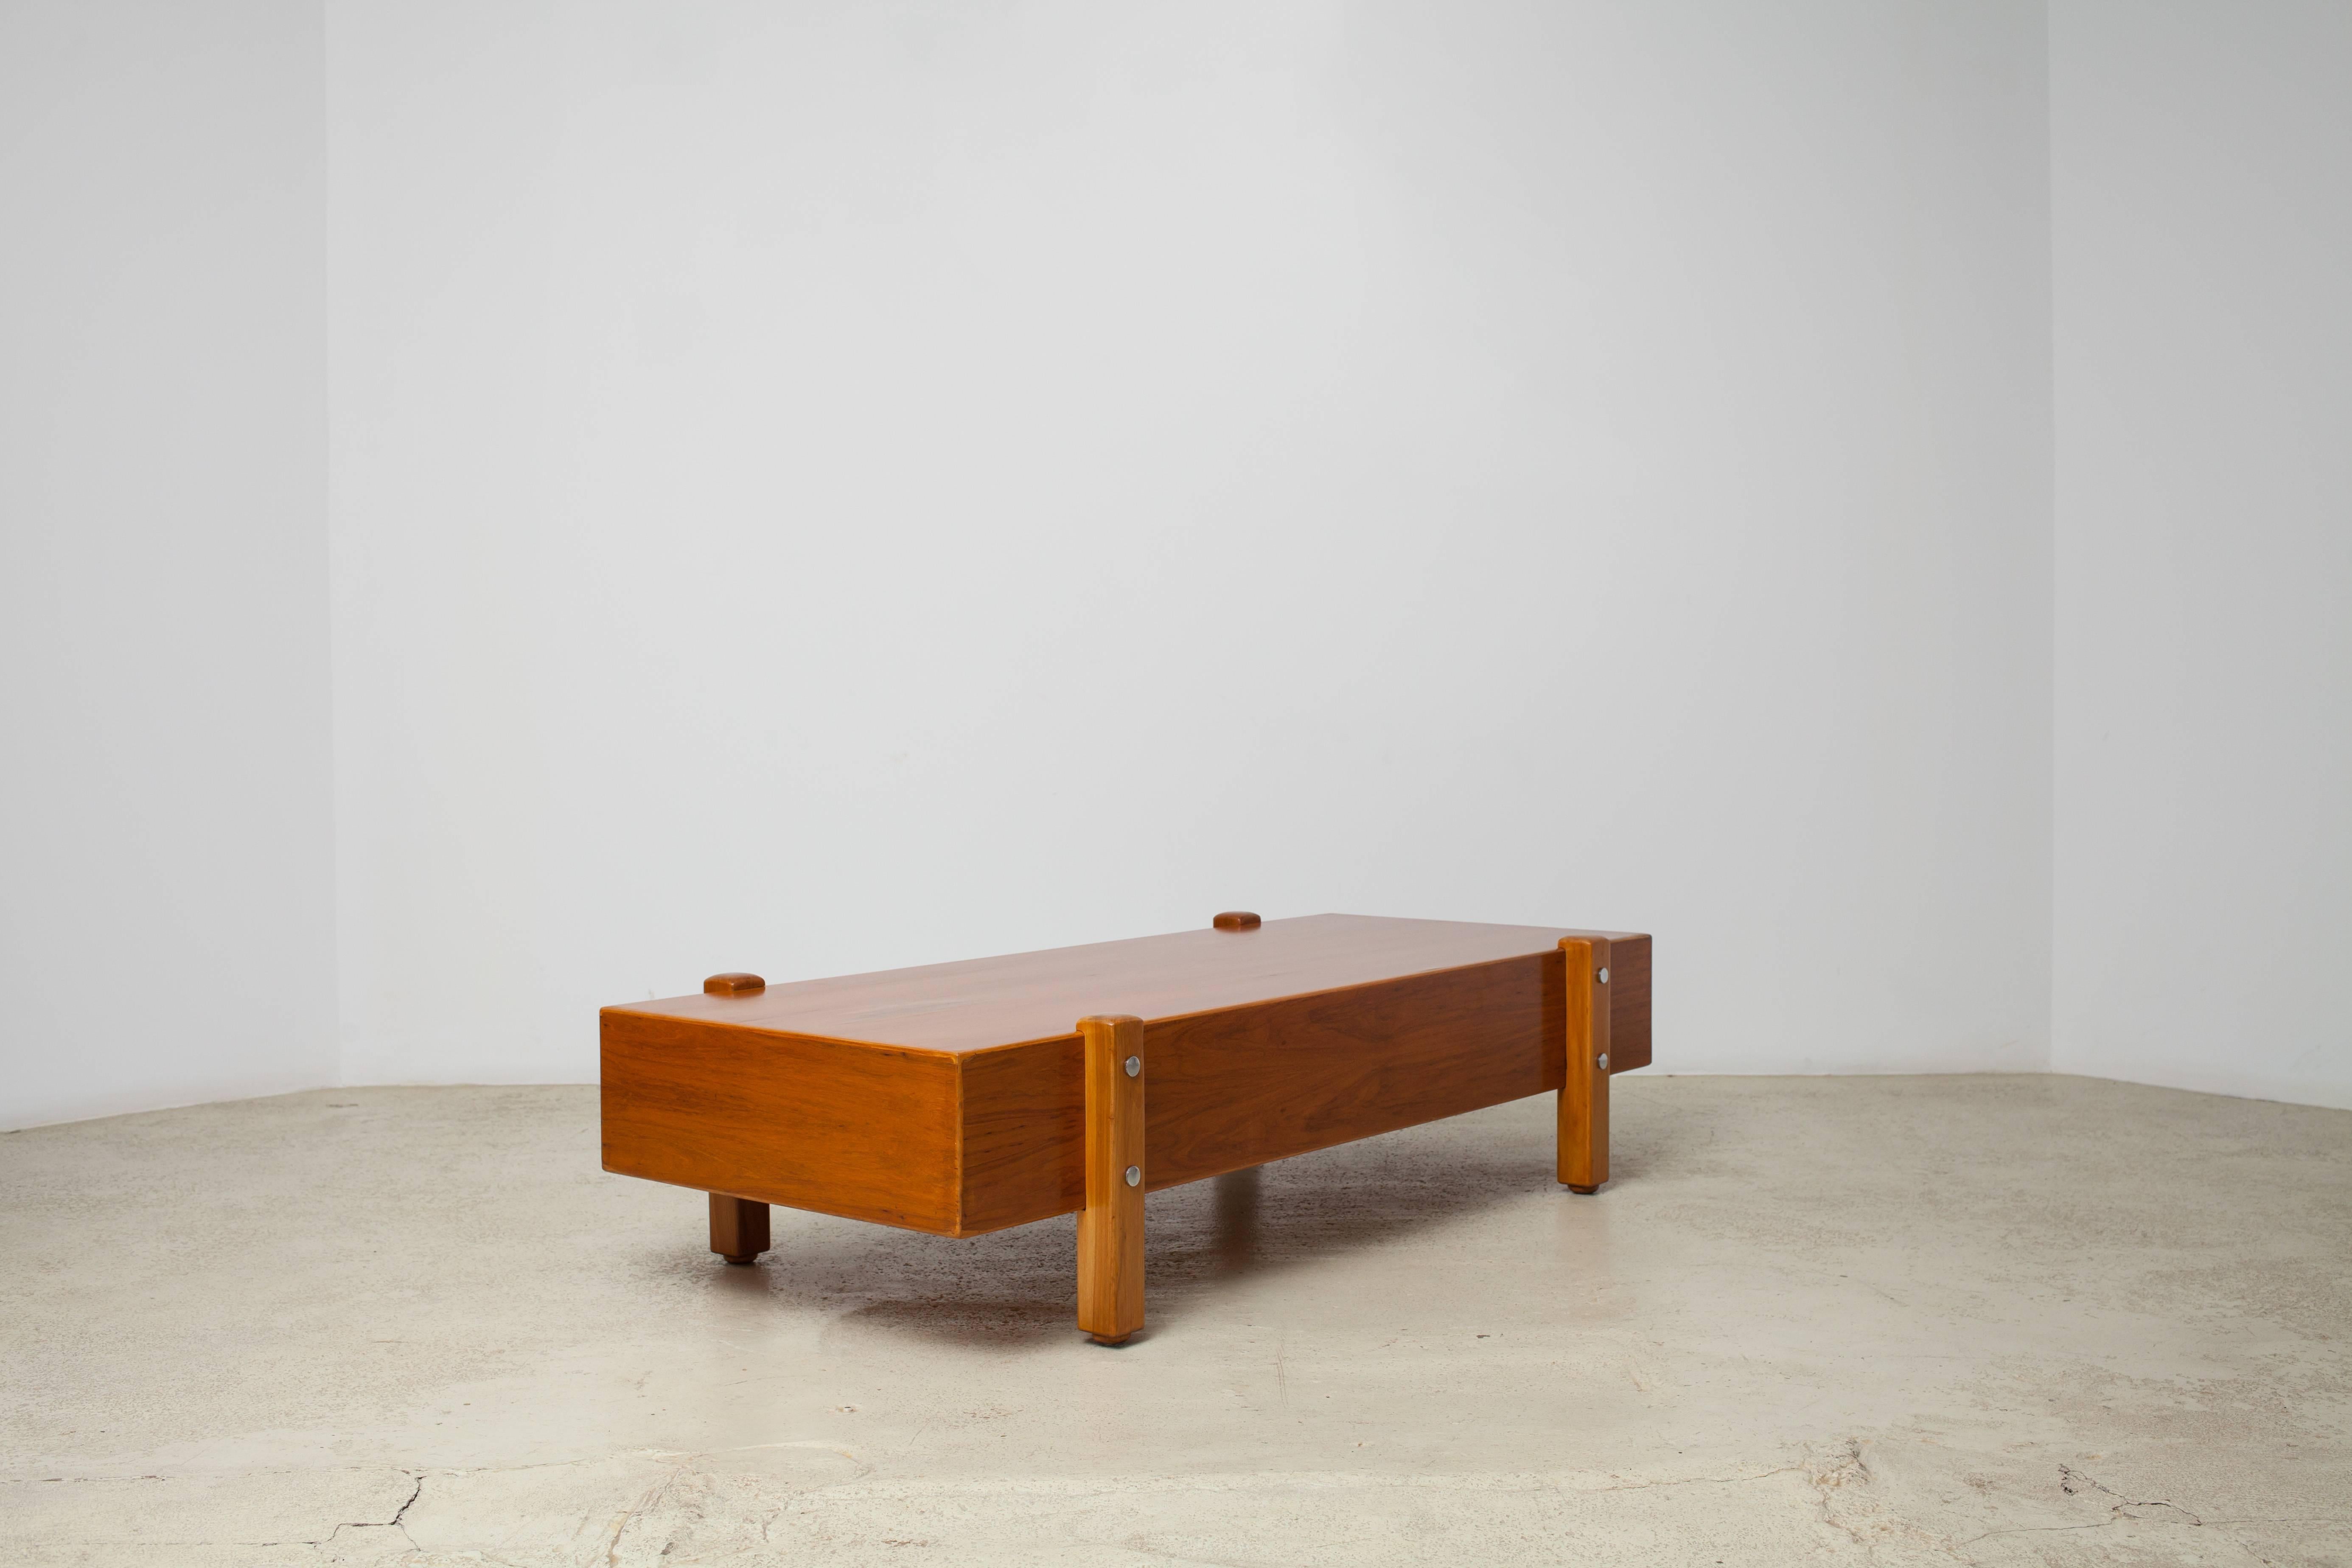 Brazilian Vintage Sergio Rodrigues, Eleh Bench / Coffee Table, 1965 For Sale